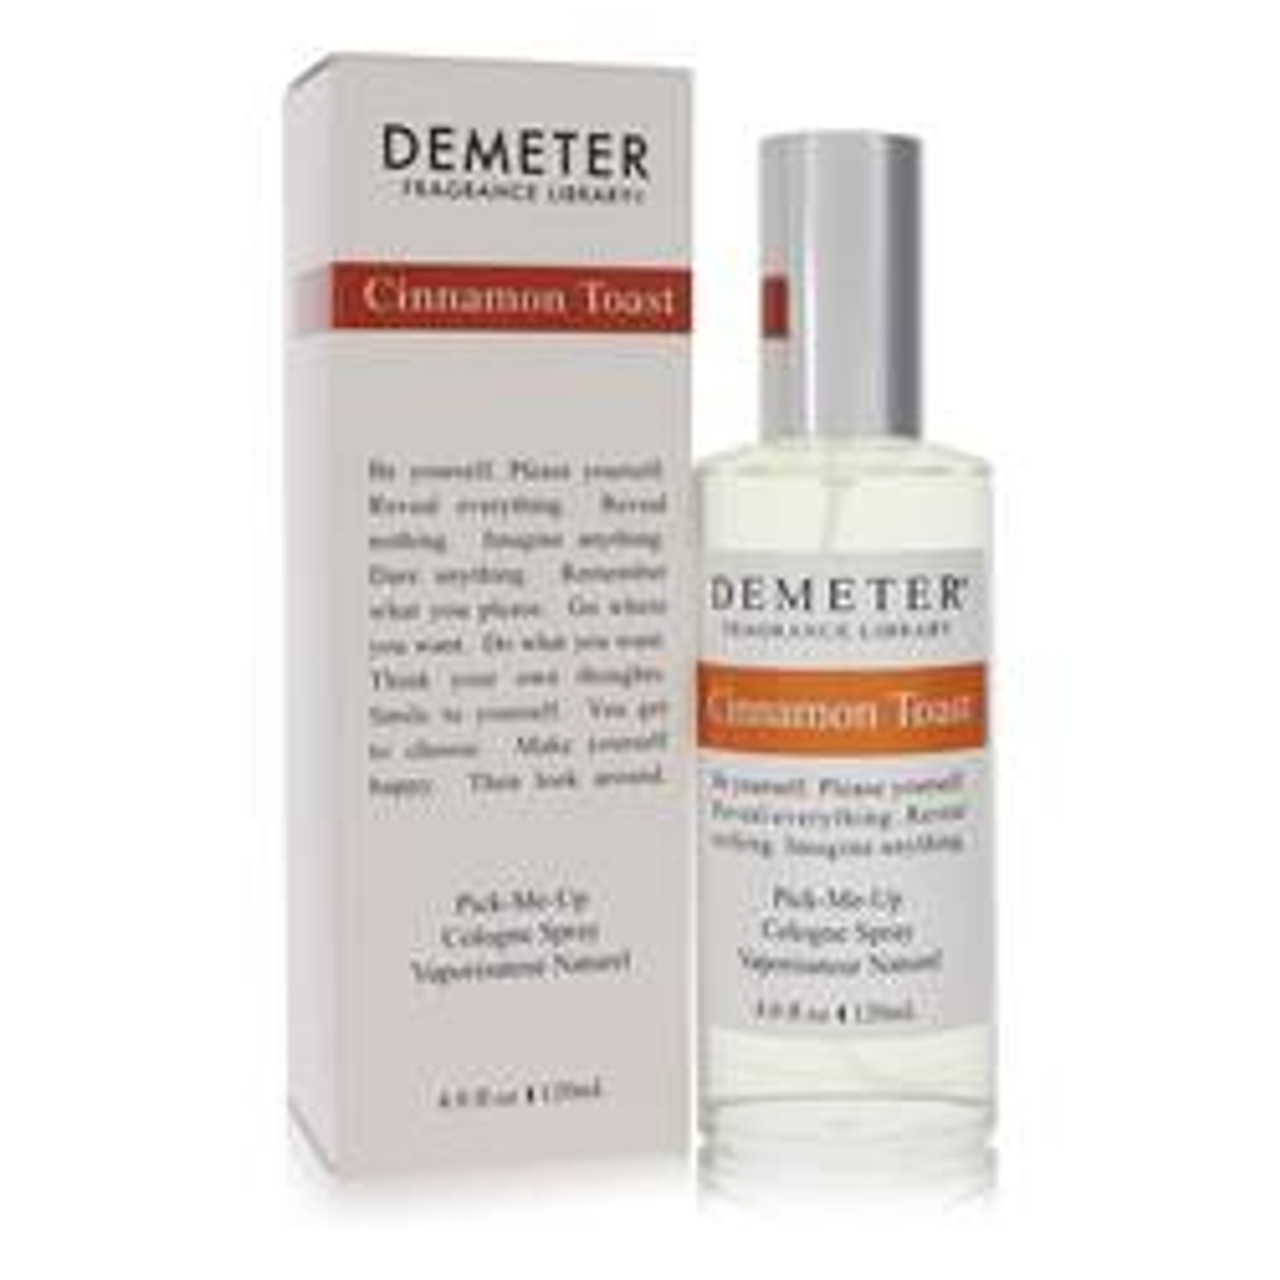 Demeter Cinnamon Toast Perfume By Demeter Cologne Spray 4 oz for Women - [From 79.50 - Choose pk Qty ] - *Ships from Miami